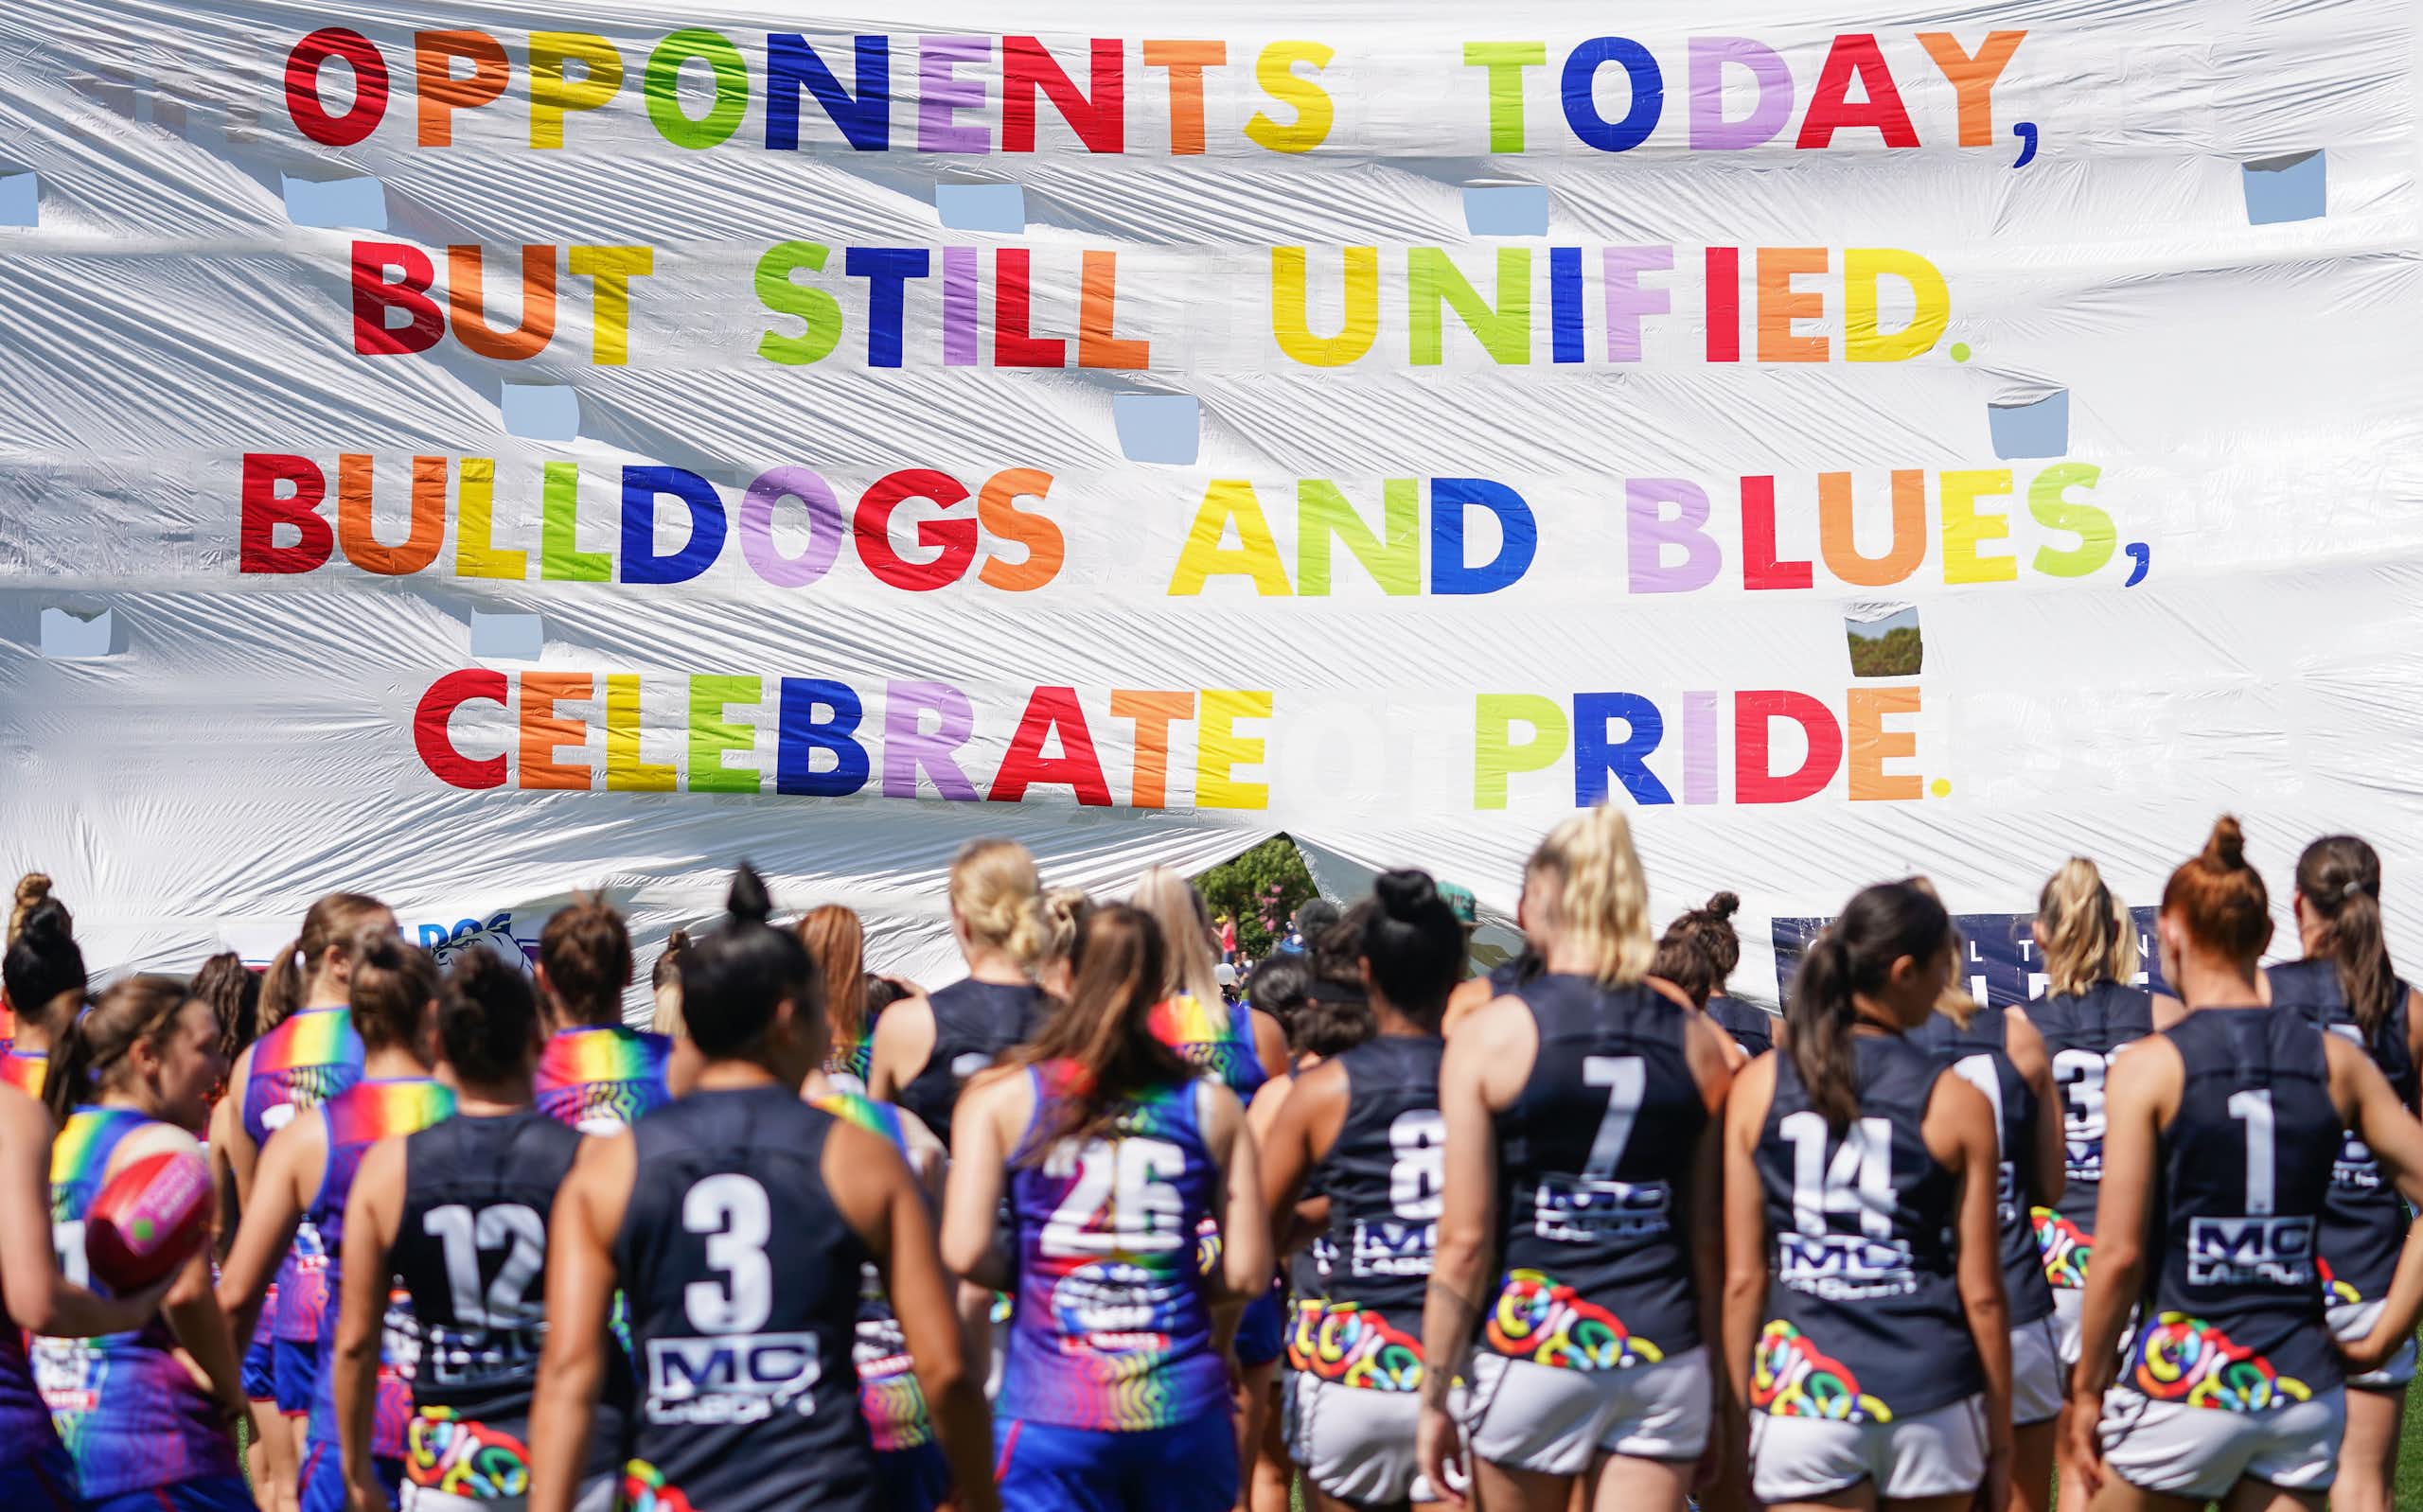 Bulldogs and Blues players run through the Pride banner ahead of an AFLW game